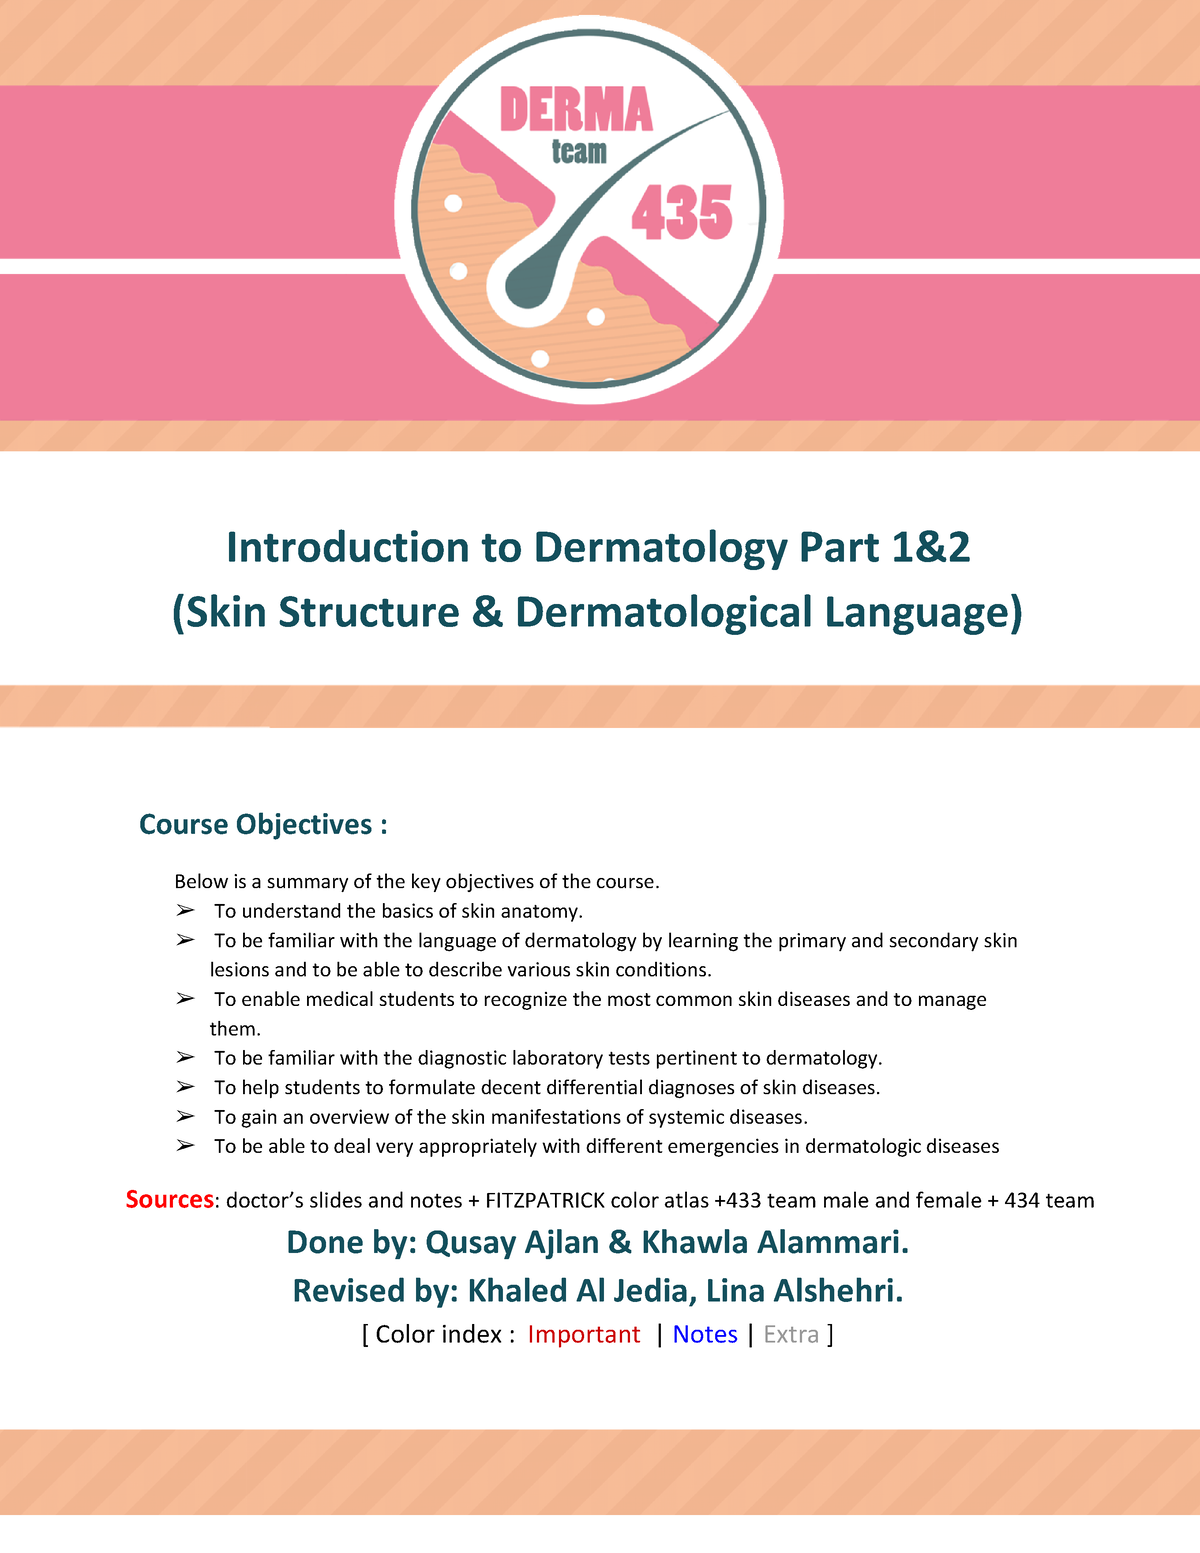 research paper topics in dermatology